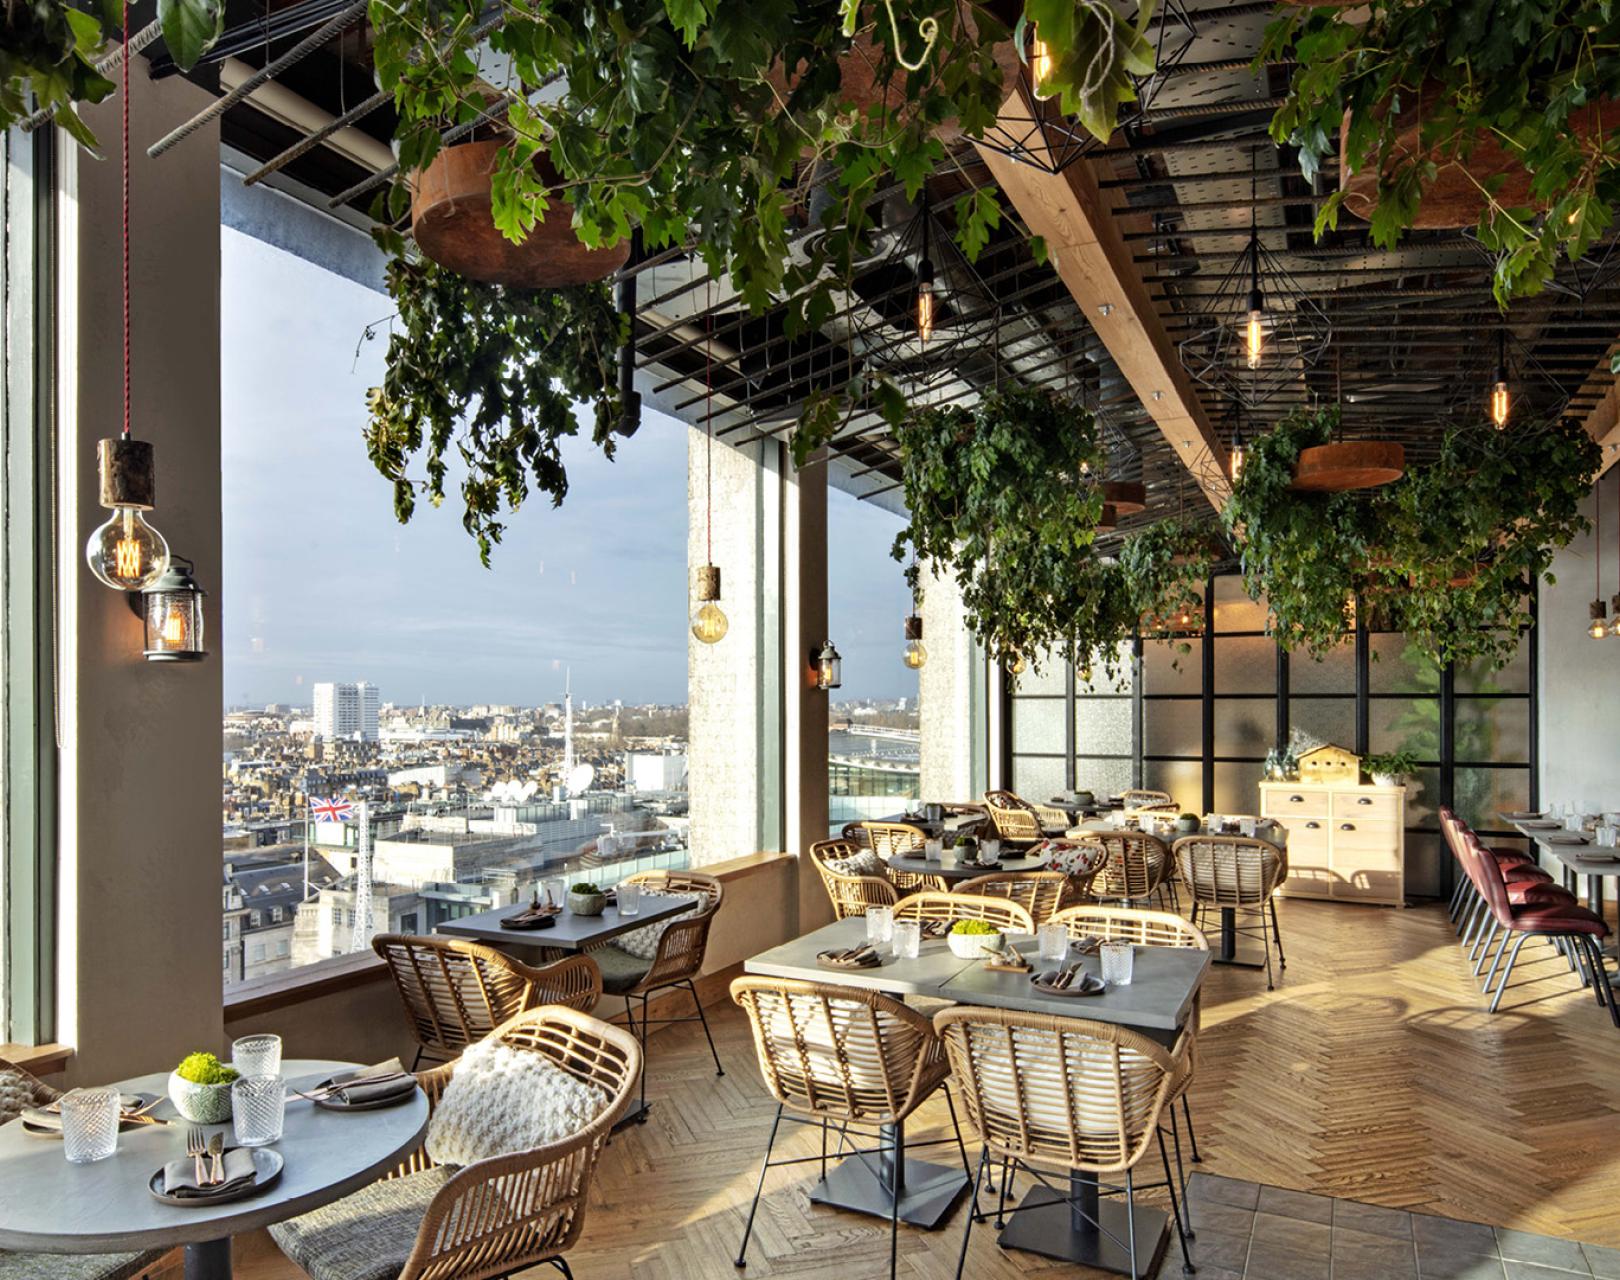 A view of the restaurant with wonderful views over London